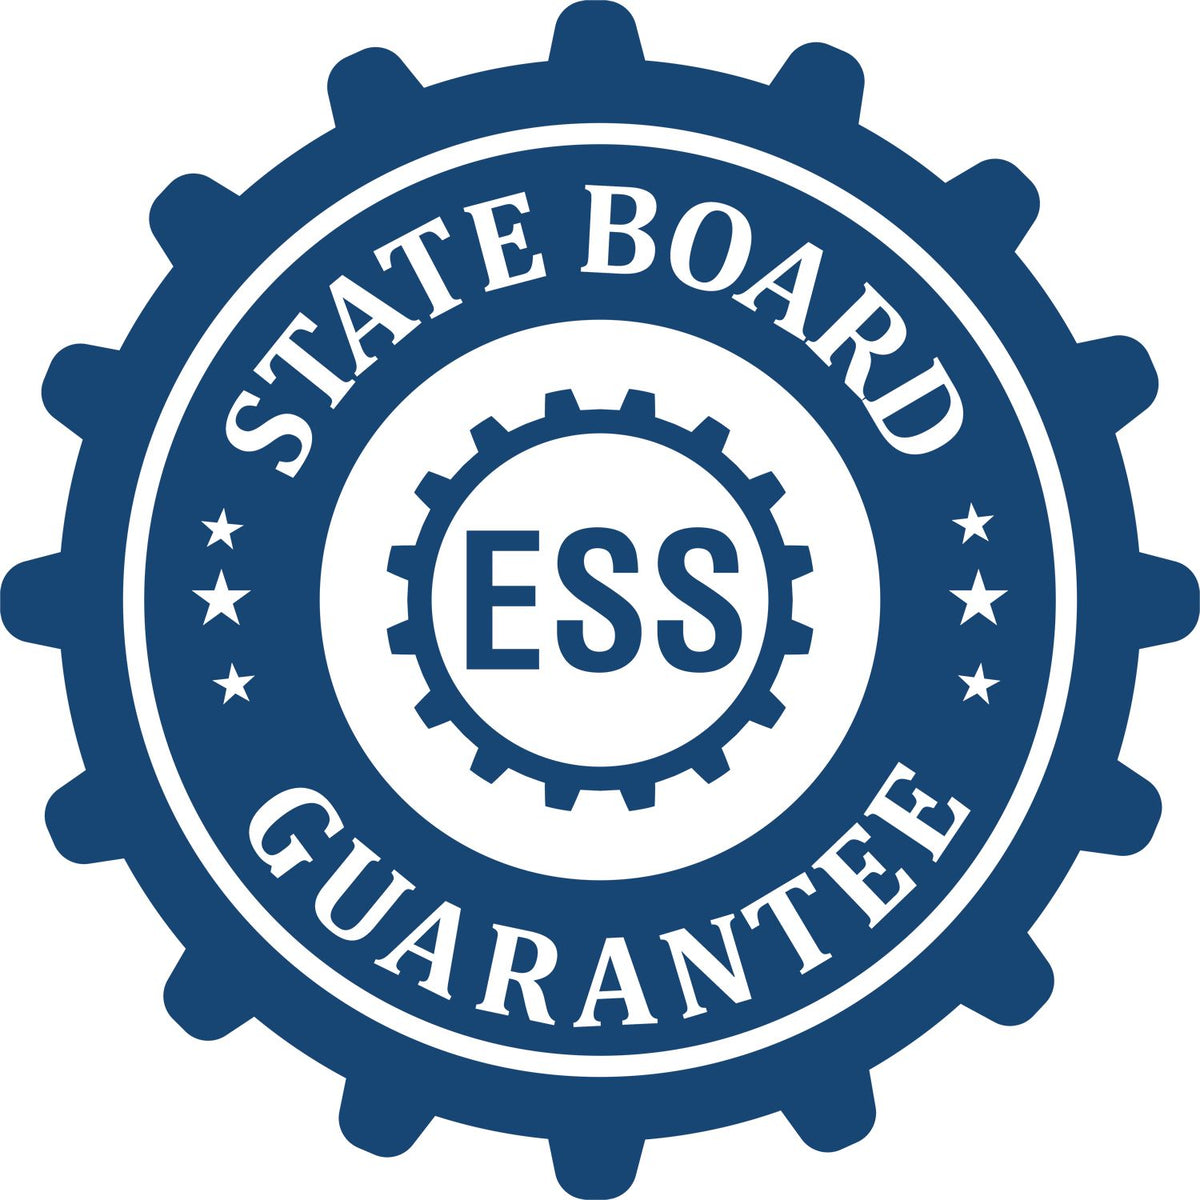 An emblem in a gear shape illustrating a state board guarantee for the Hybrid Virginia Landscape Architect Seal